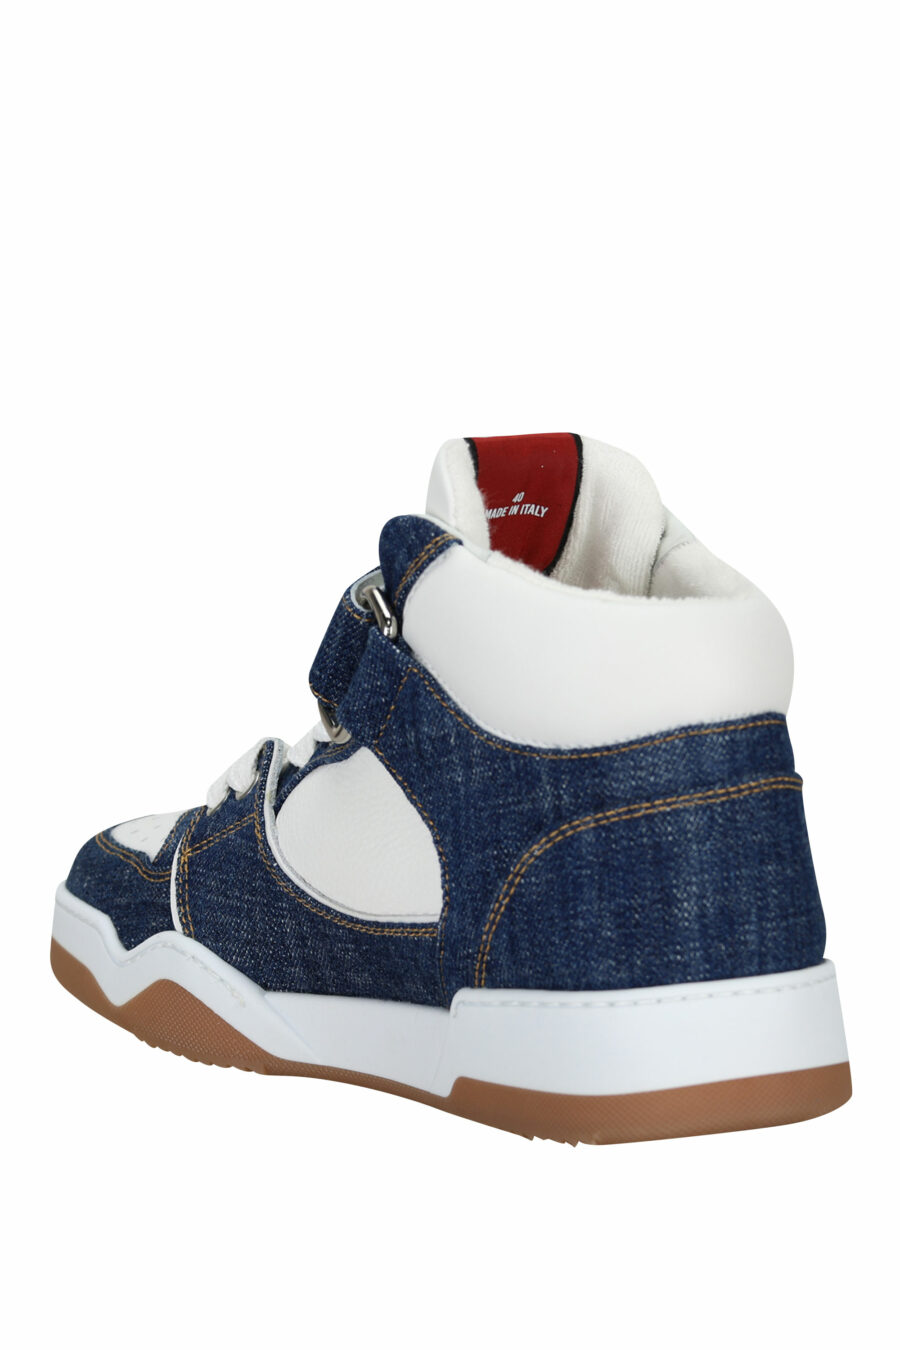 Blue denim "spyker" white high top trainers with logo - 8055777306079 3